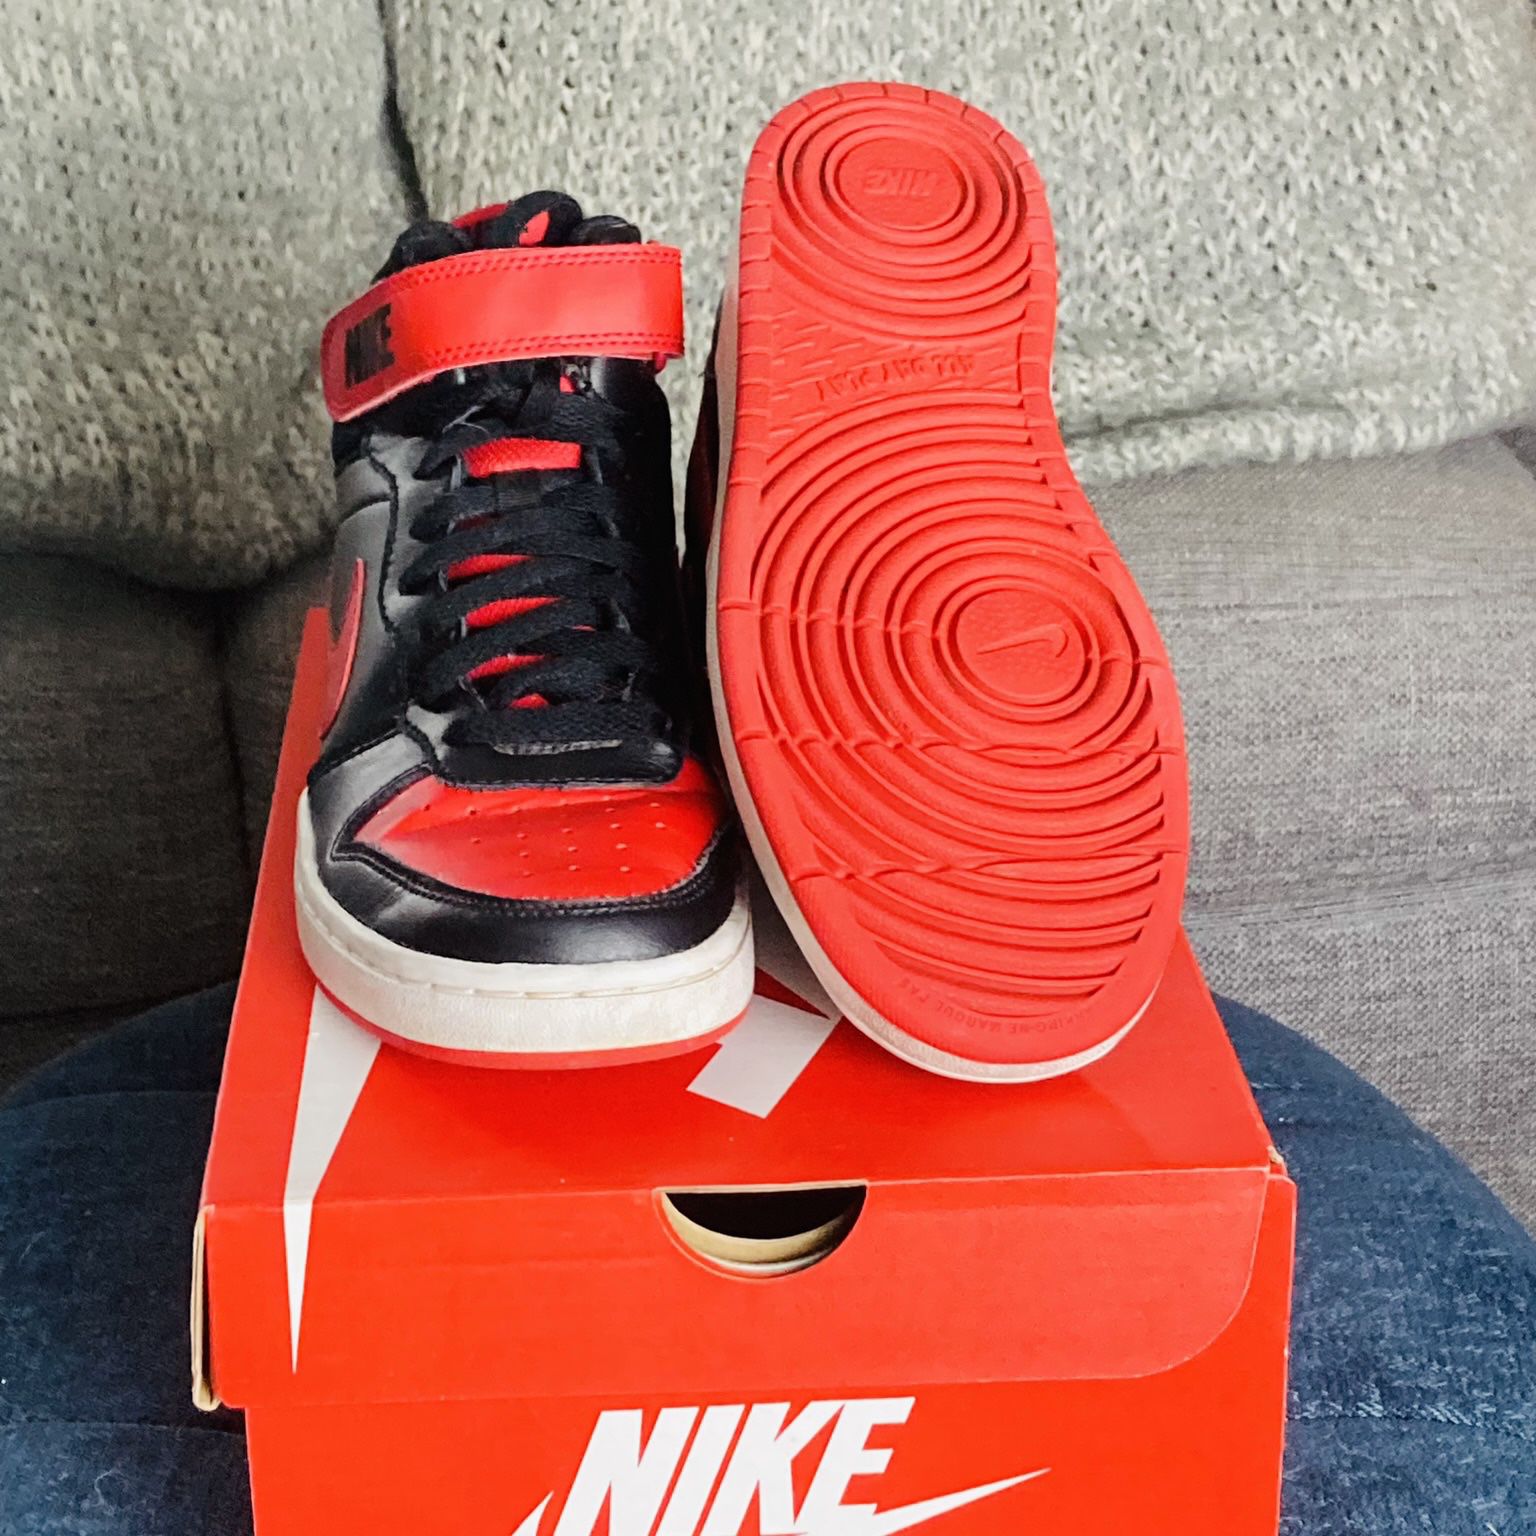 Red Nike Shoes 